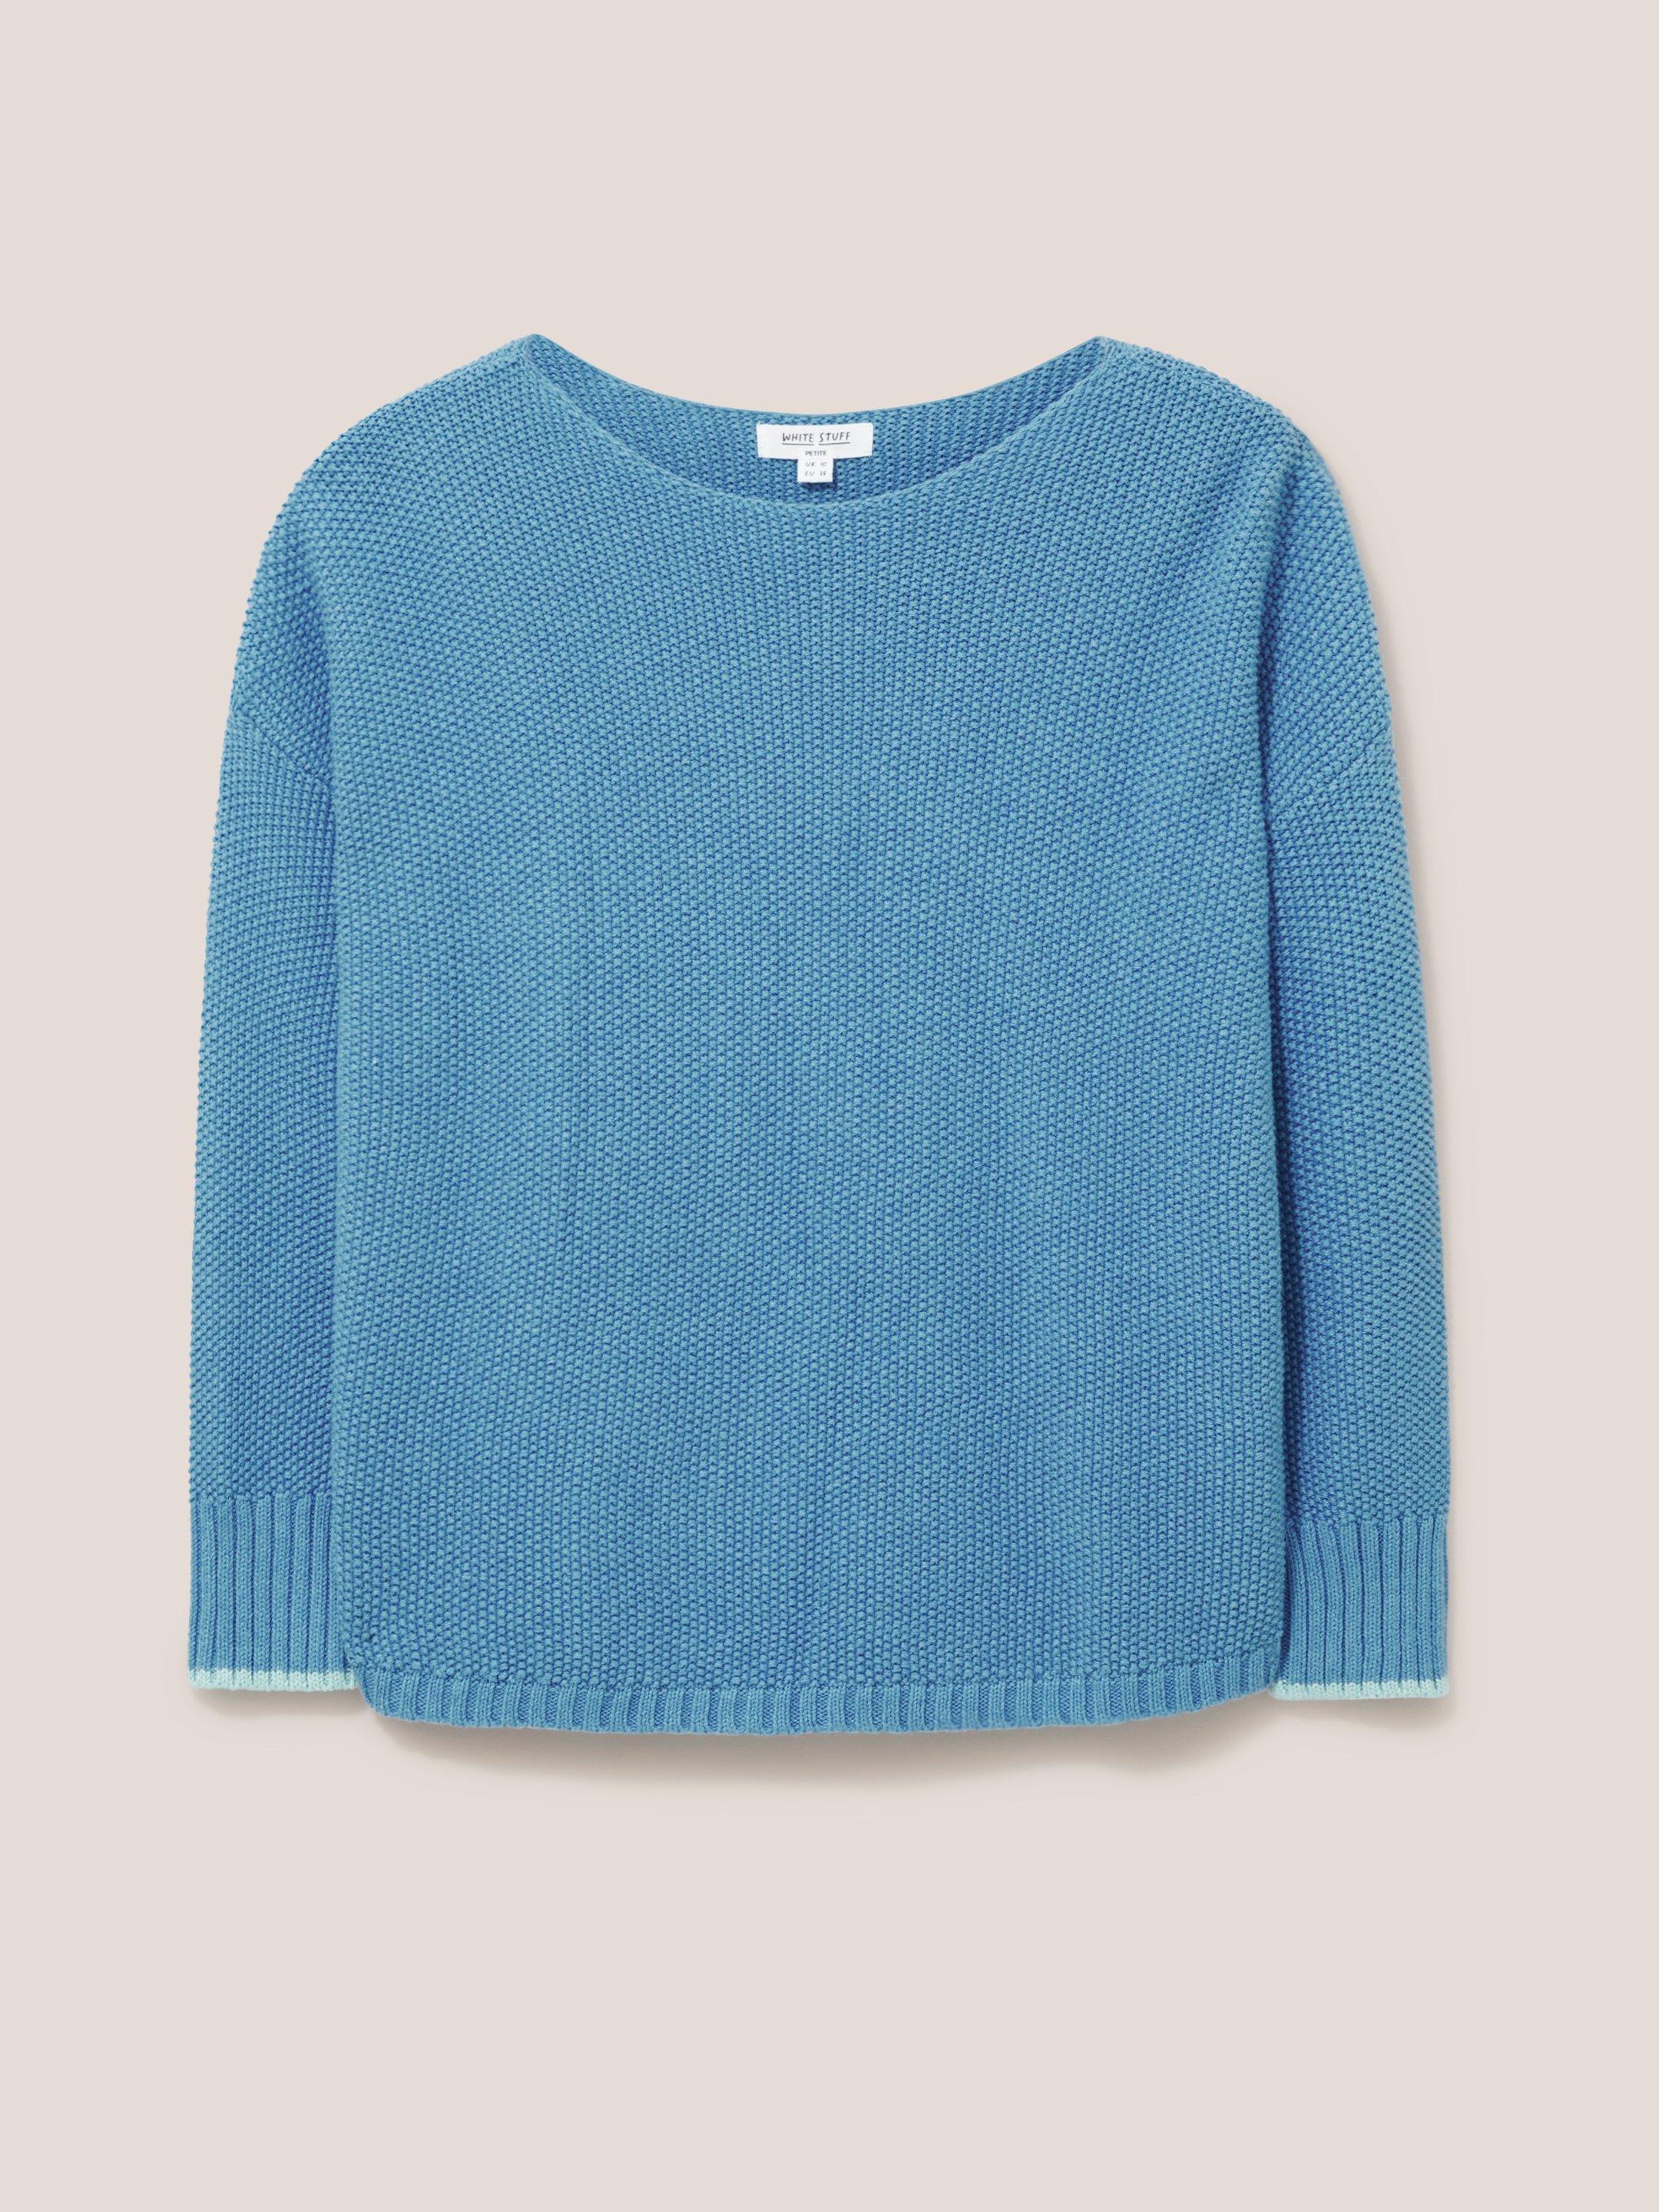 Southbank Jumper in MID BLUE - FLAT FRONT